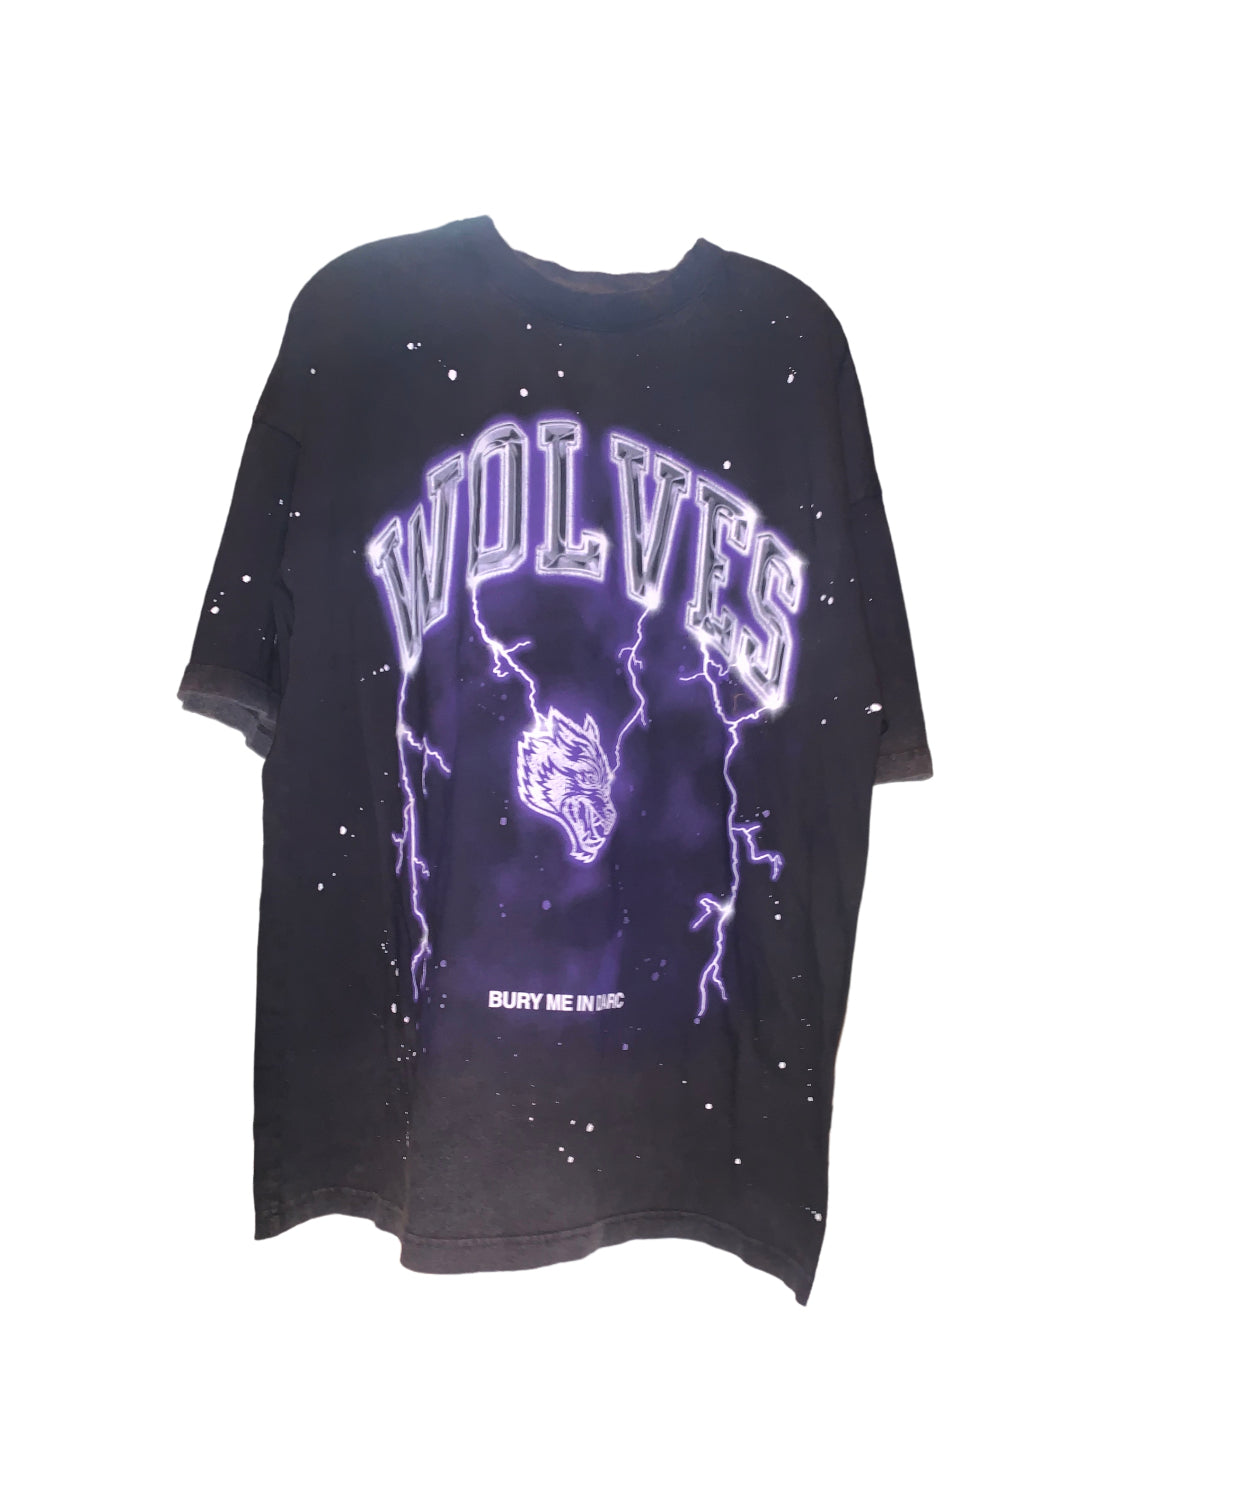 Wolves tee